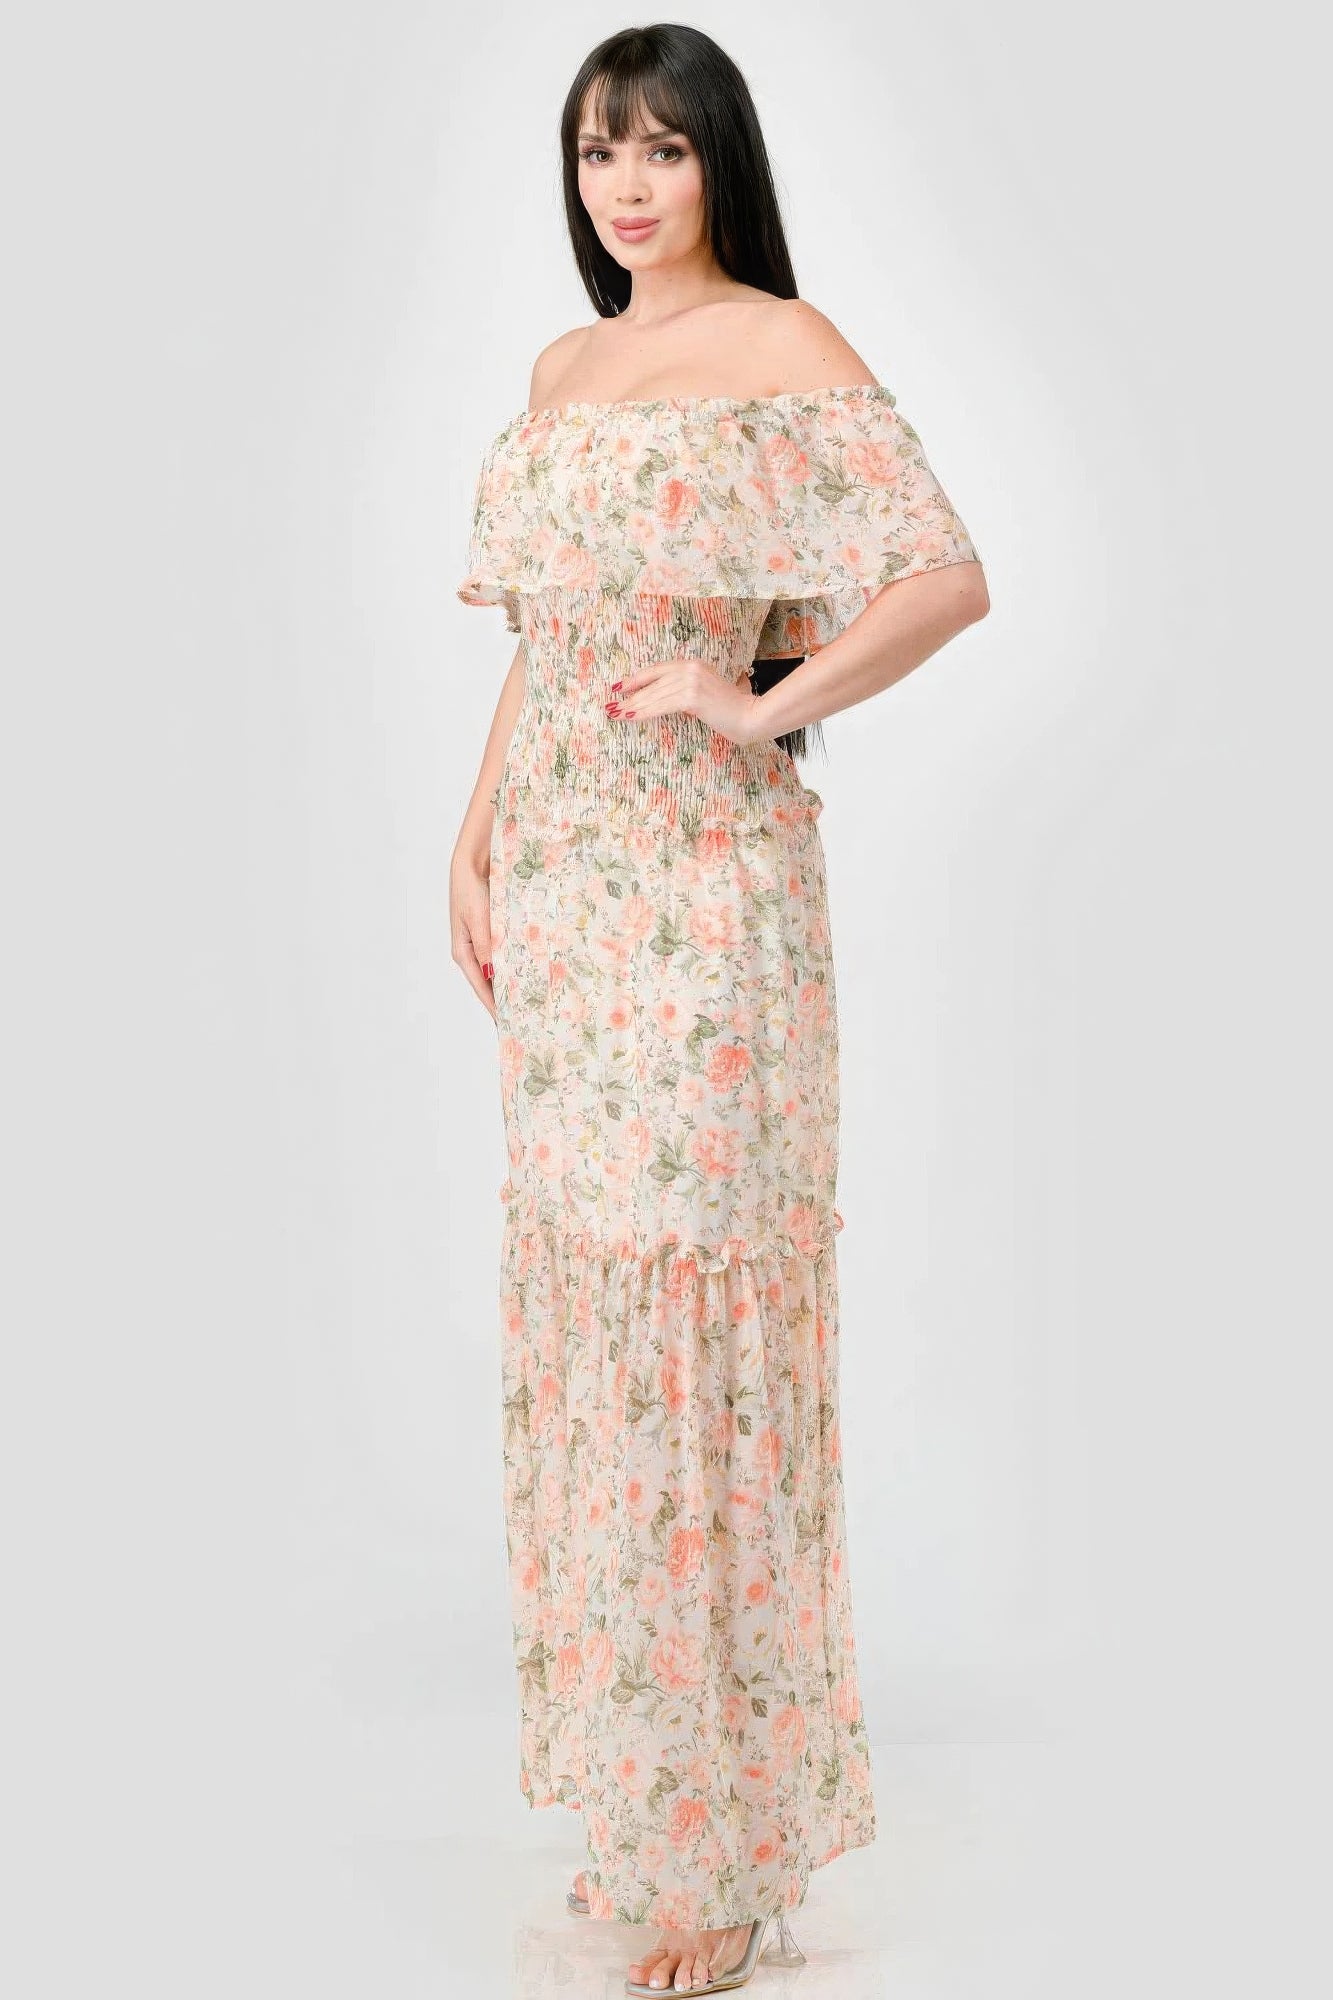 THE MARLIE Floral Chiffon Off Shoulder Smocked Back Ruffled Tiered Maxi Dress